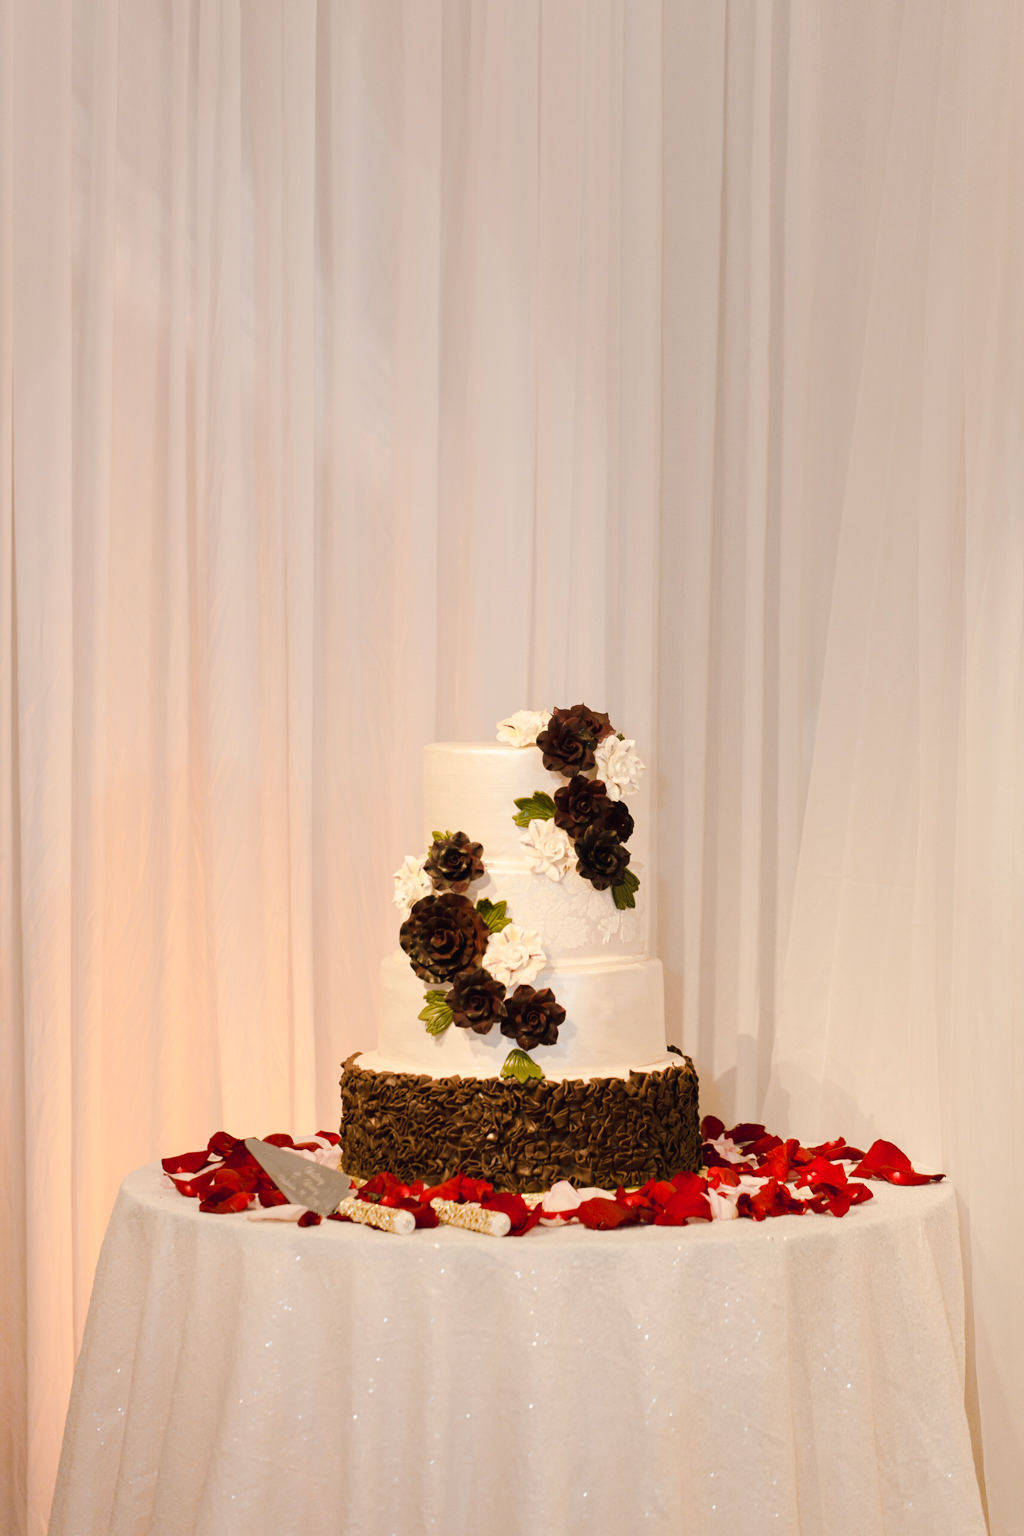 Three Tier White and Chocolate Brown Ruffle Wedding Cake with Cascading Sugar White and Brown Roses on Round Table with White Sparkle Linen and Red Rose Petals and White Drapery Backdrop